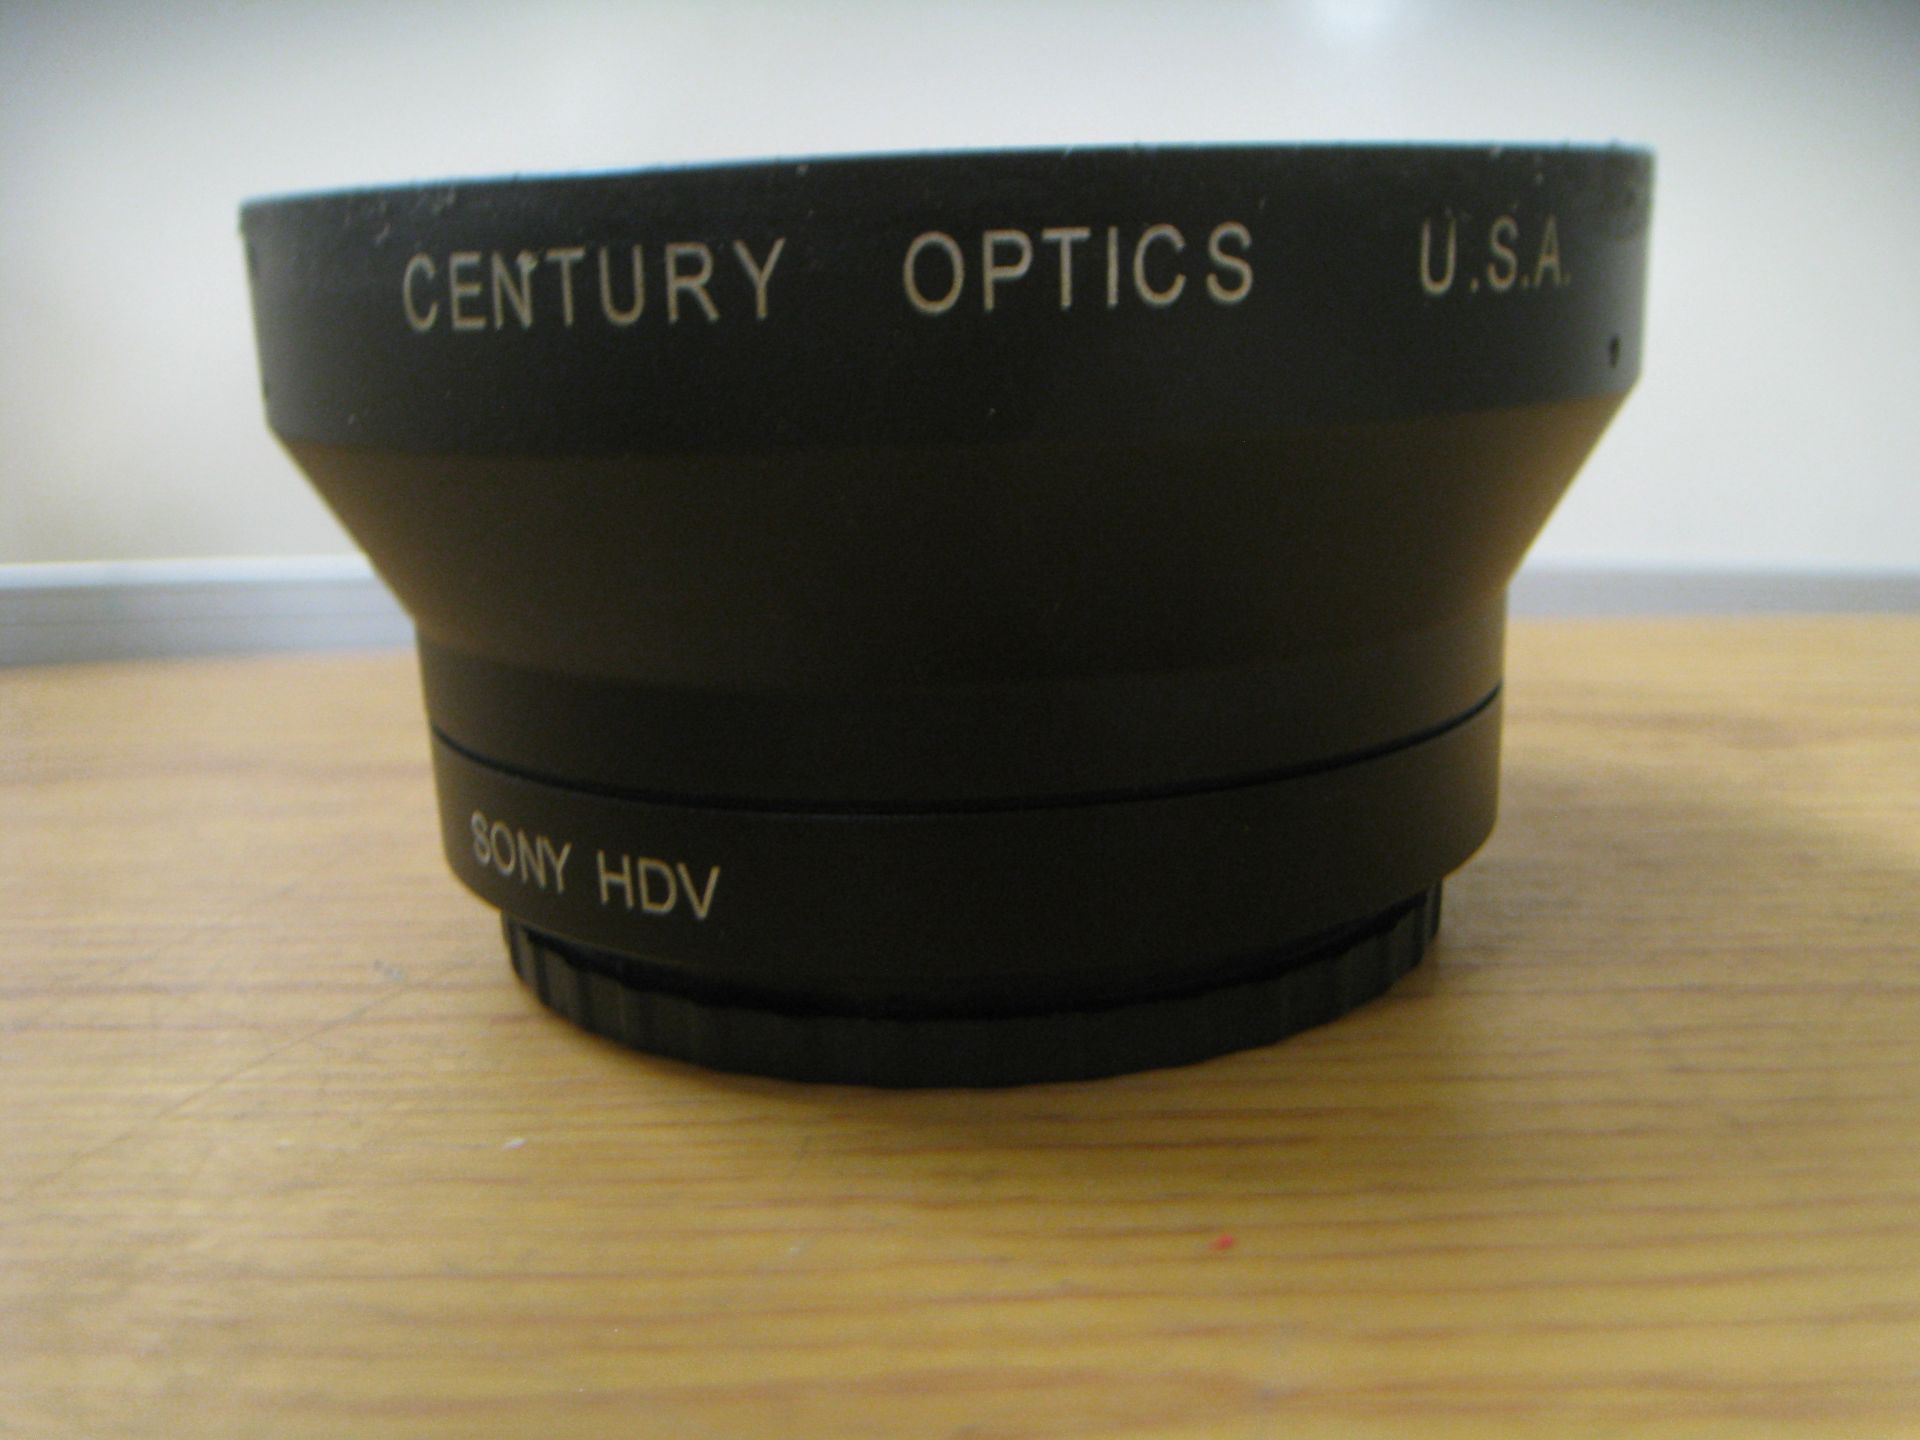 SONY HDV PRO SERIES HD 0.7x WIDE ANGLE CONVERTER C110852.(METAL LIP AT FRONT OF LENS BENT - SEE